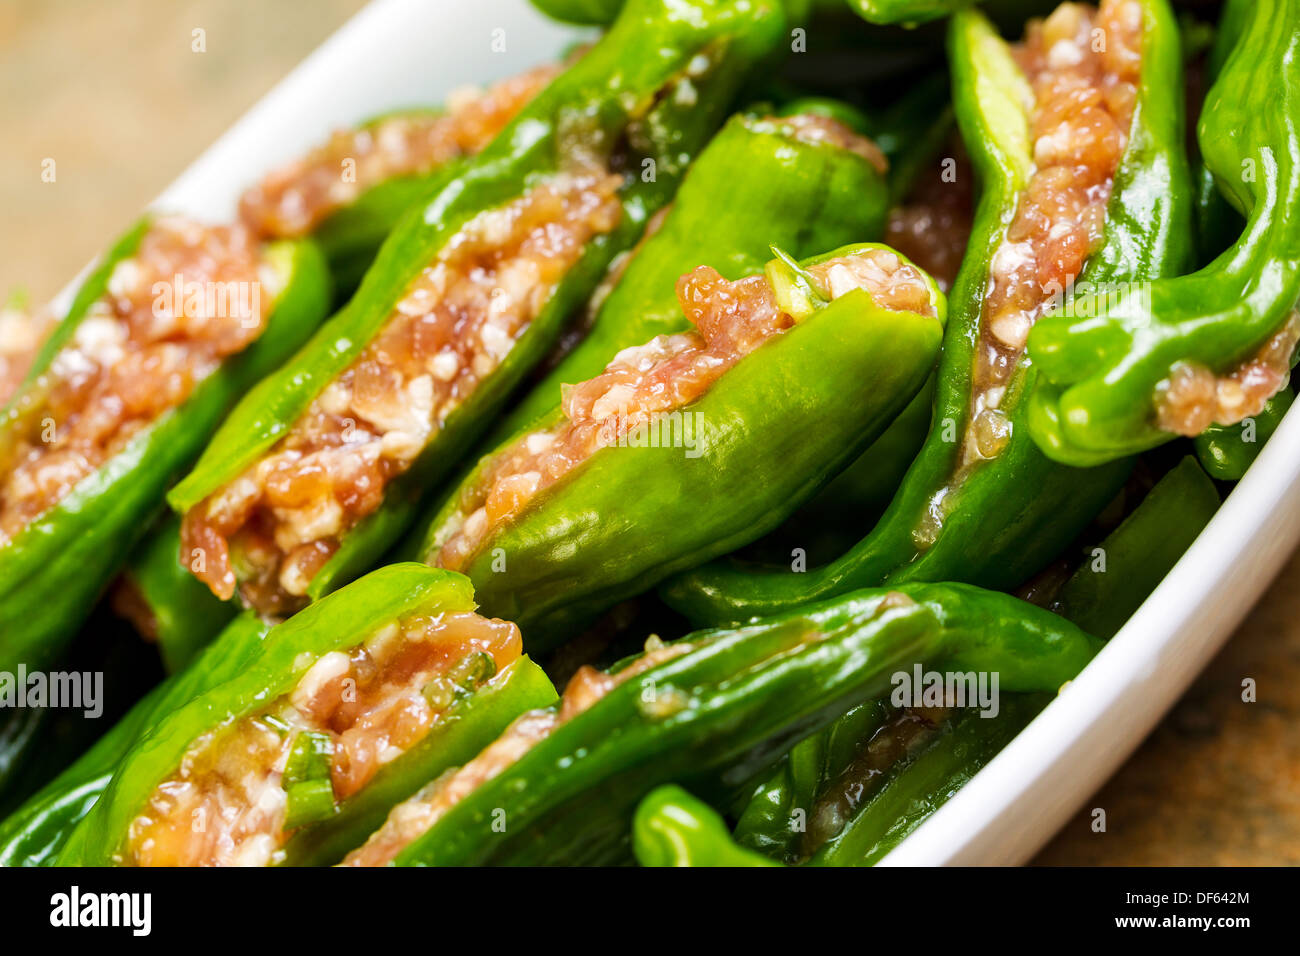 Closeup tilted horizontal photo of uncooked fresh, stuffed green sweet peppers, in white bowl, on stone counter top Stock Photo